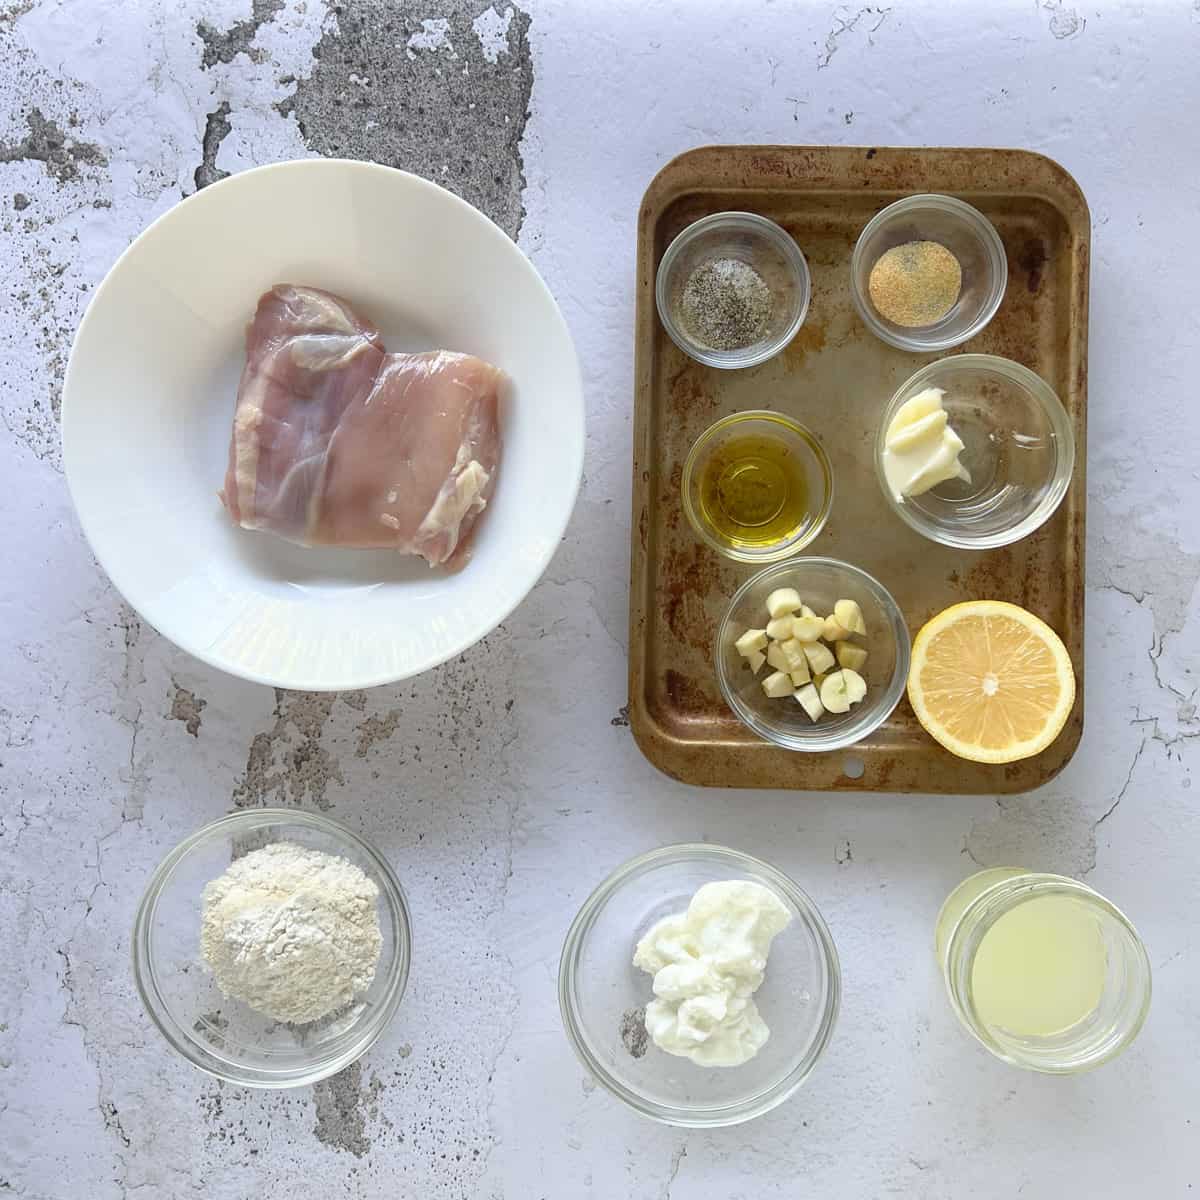 ingredients to make garlic chicken measured out on a textured surface.